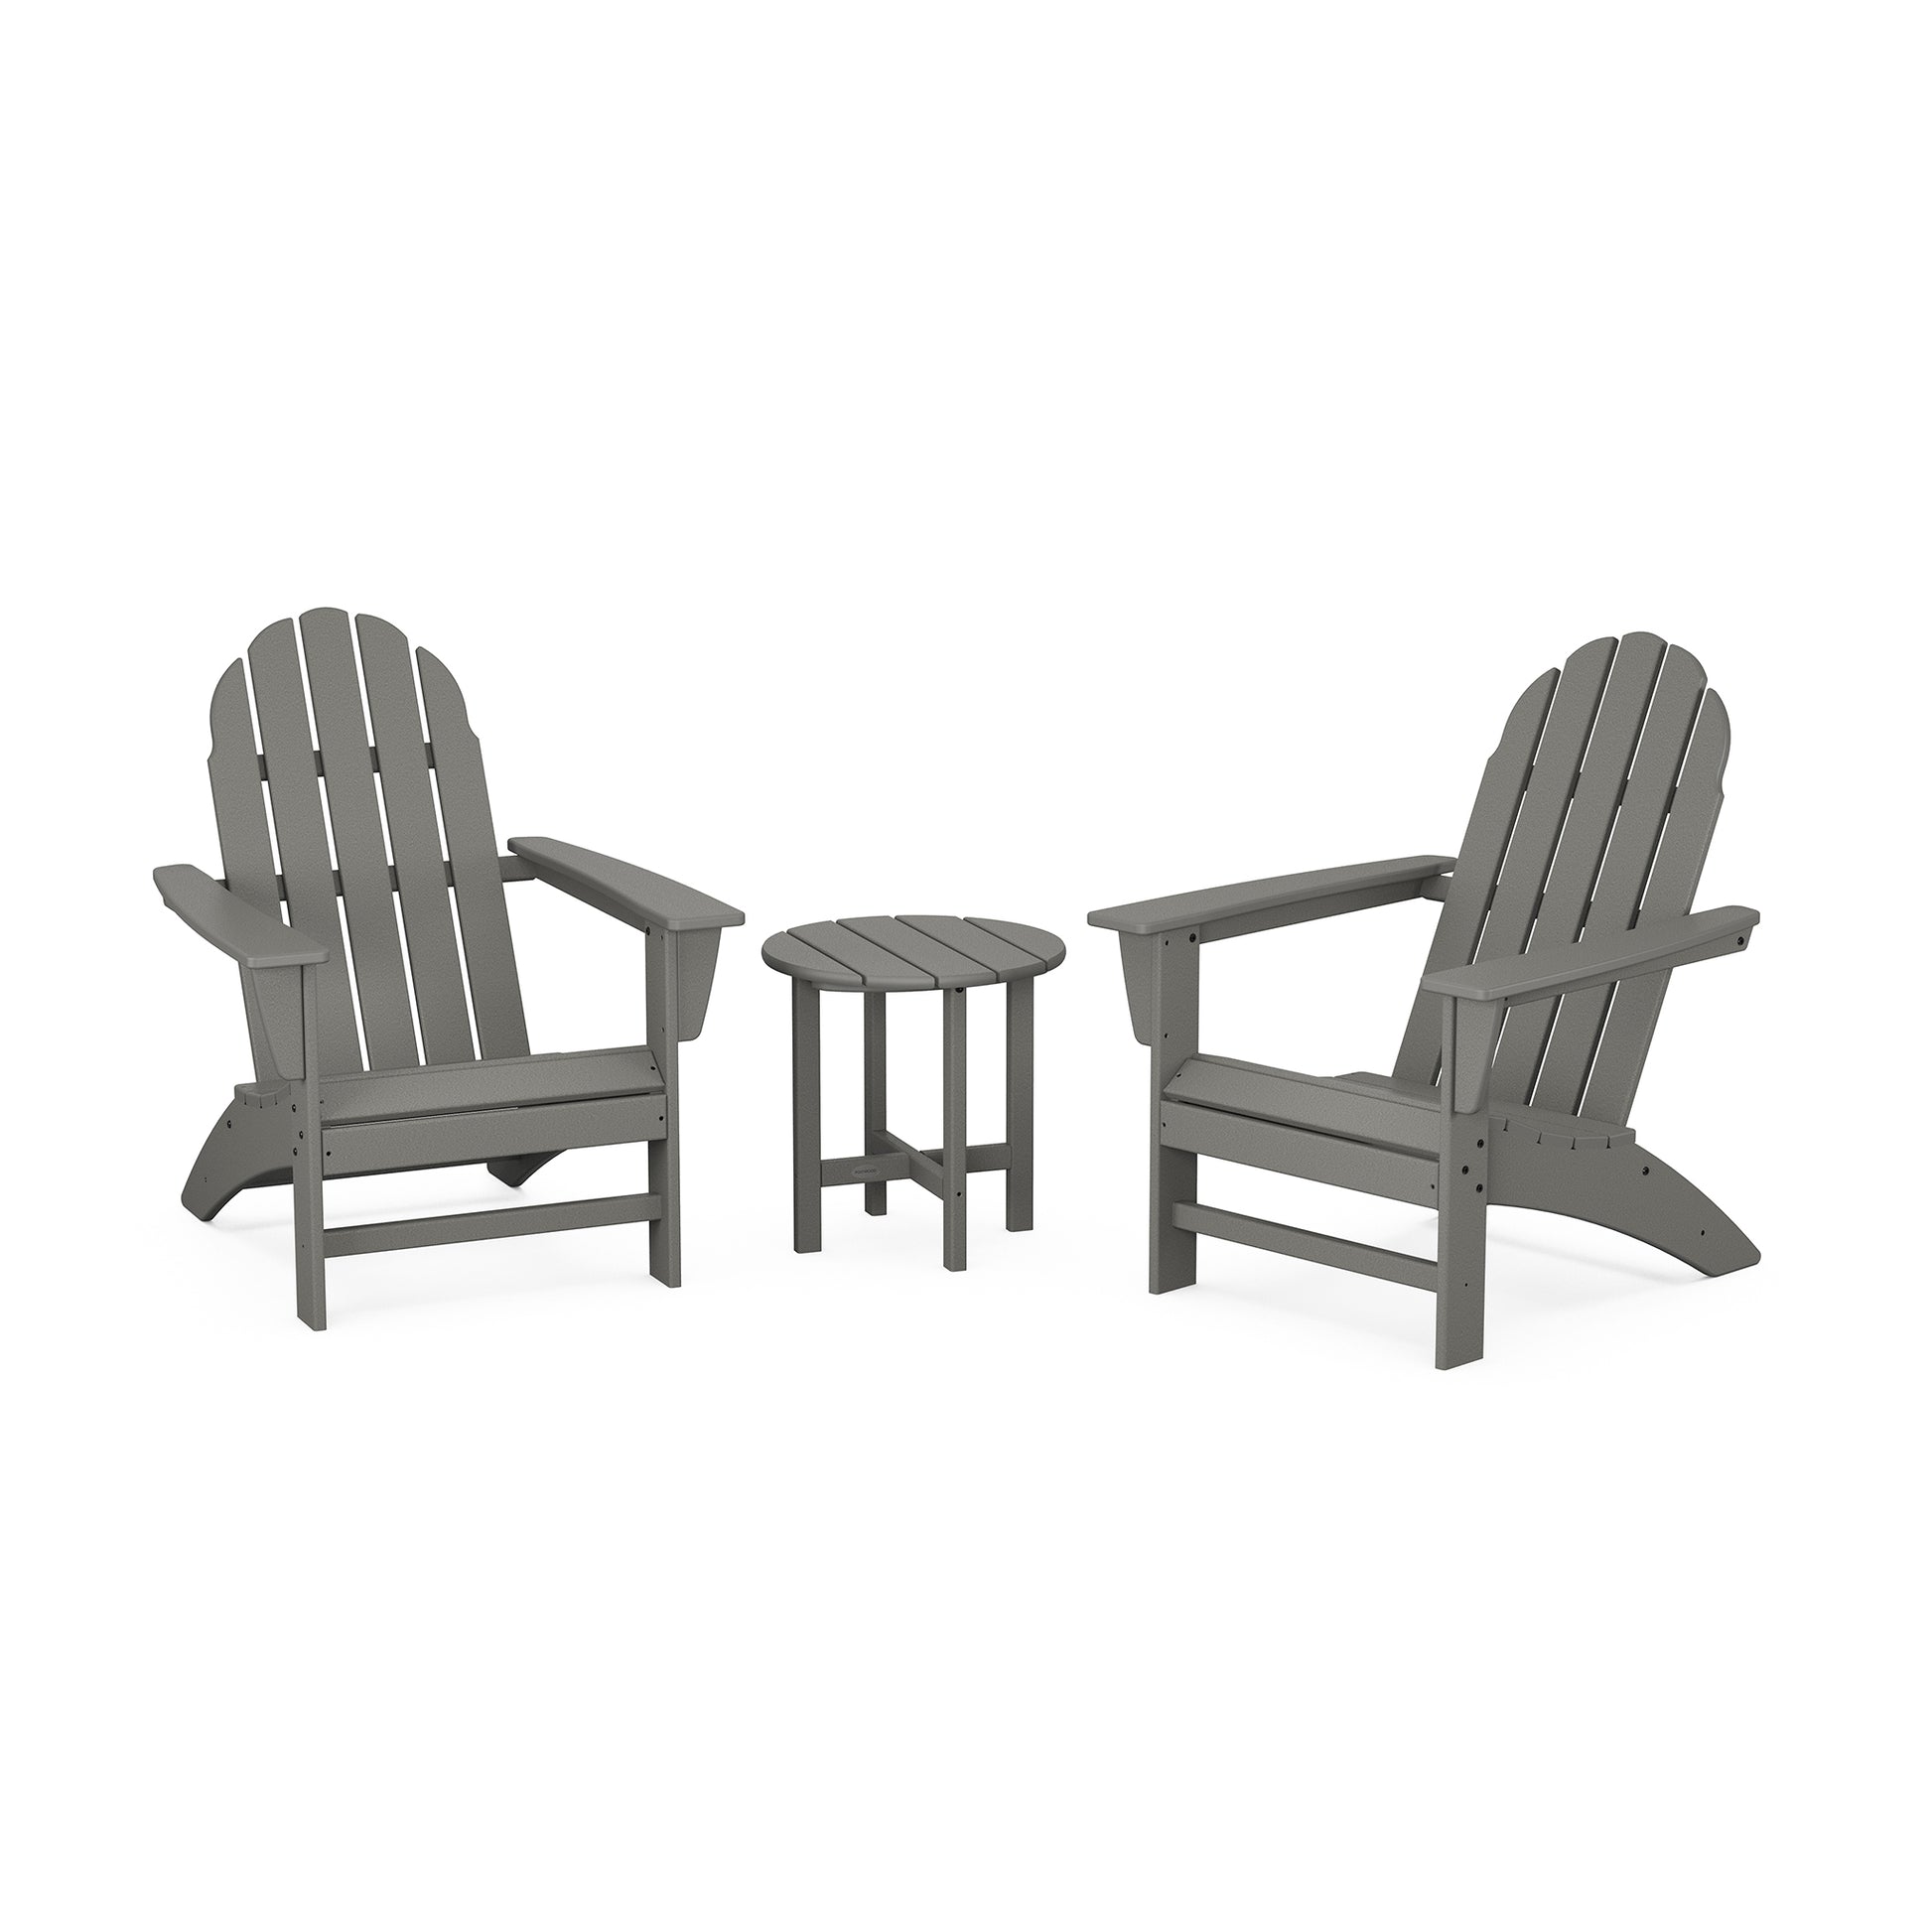 Two gray POLYWOOD Vineyard 3-Piece Adirondack Sets face each other with a small round table in between, set against a plain white background.